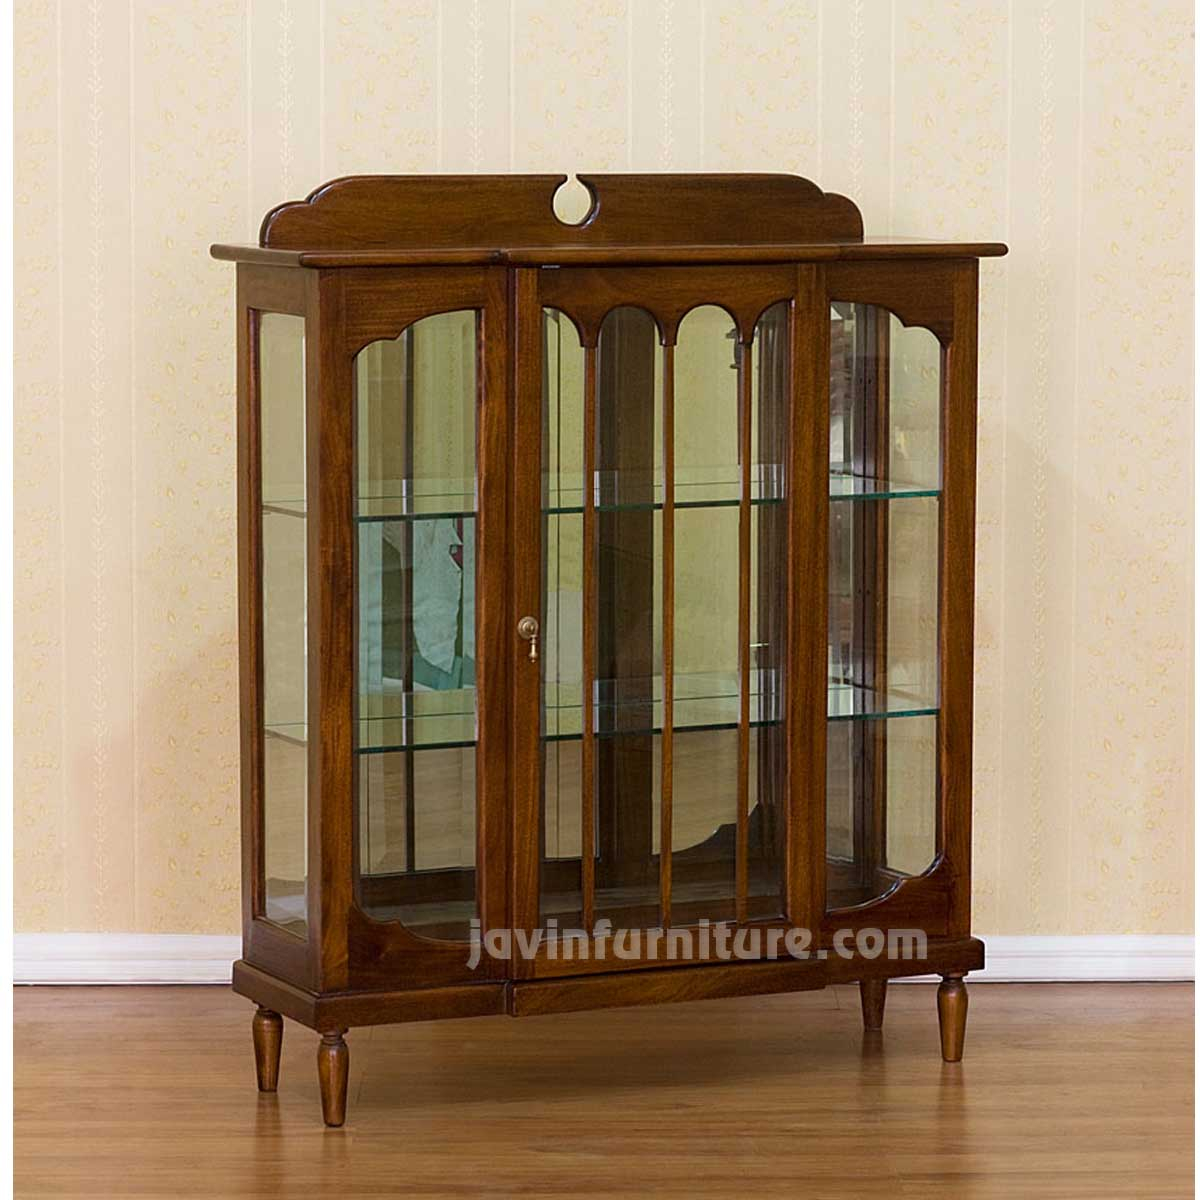 Small Display Cabinets With Glass Doors Image Collections Doors within dimensions 1200 X 1200